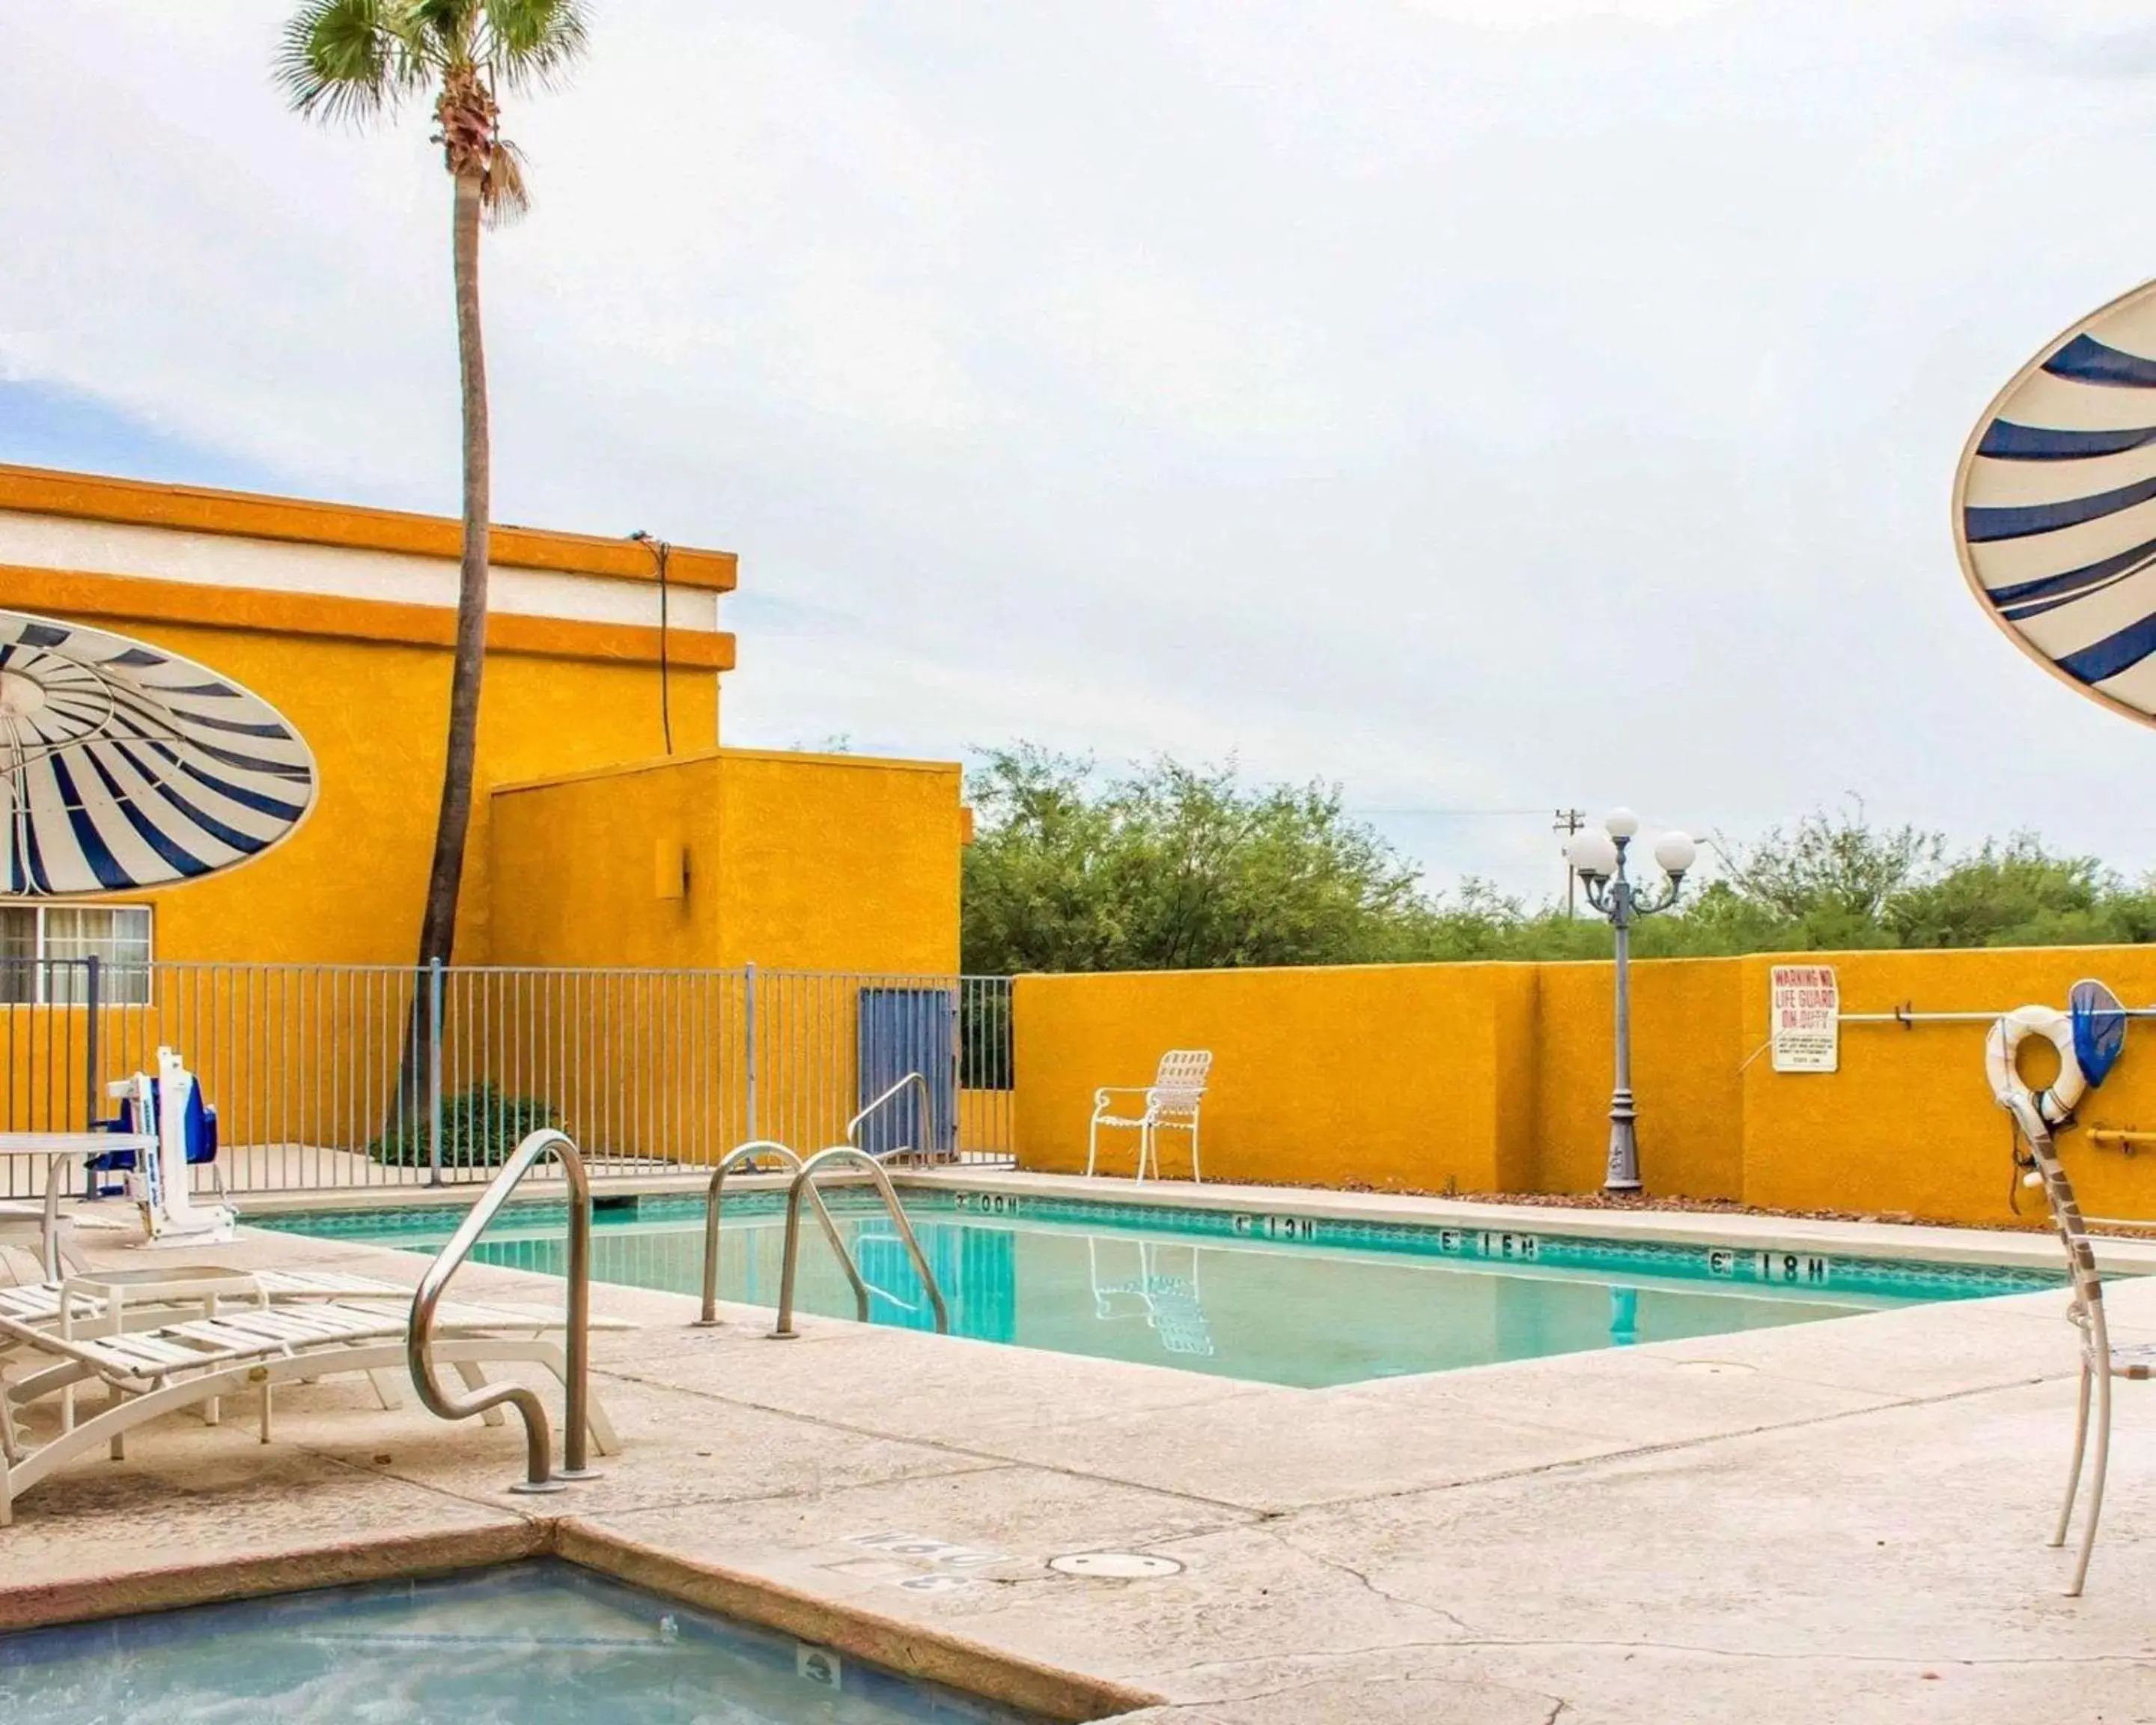 On site, Swimming Pool in Quality Inn - Tucson Airport